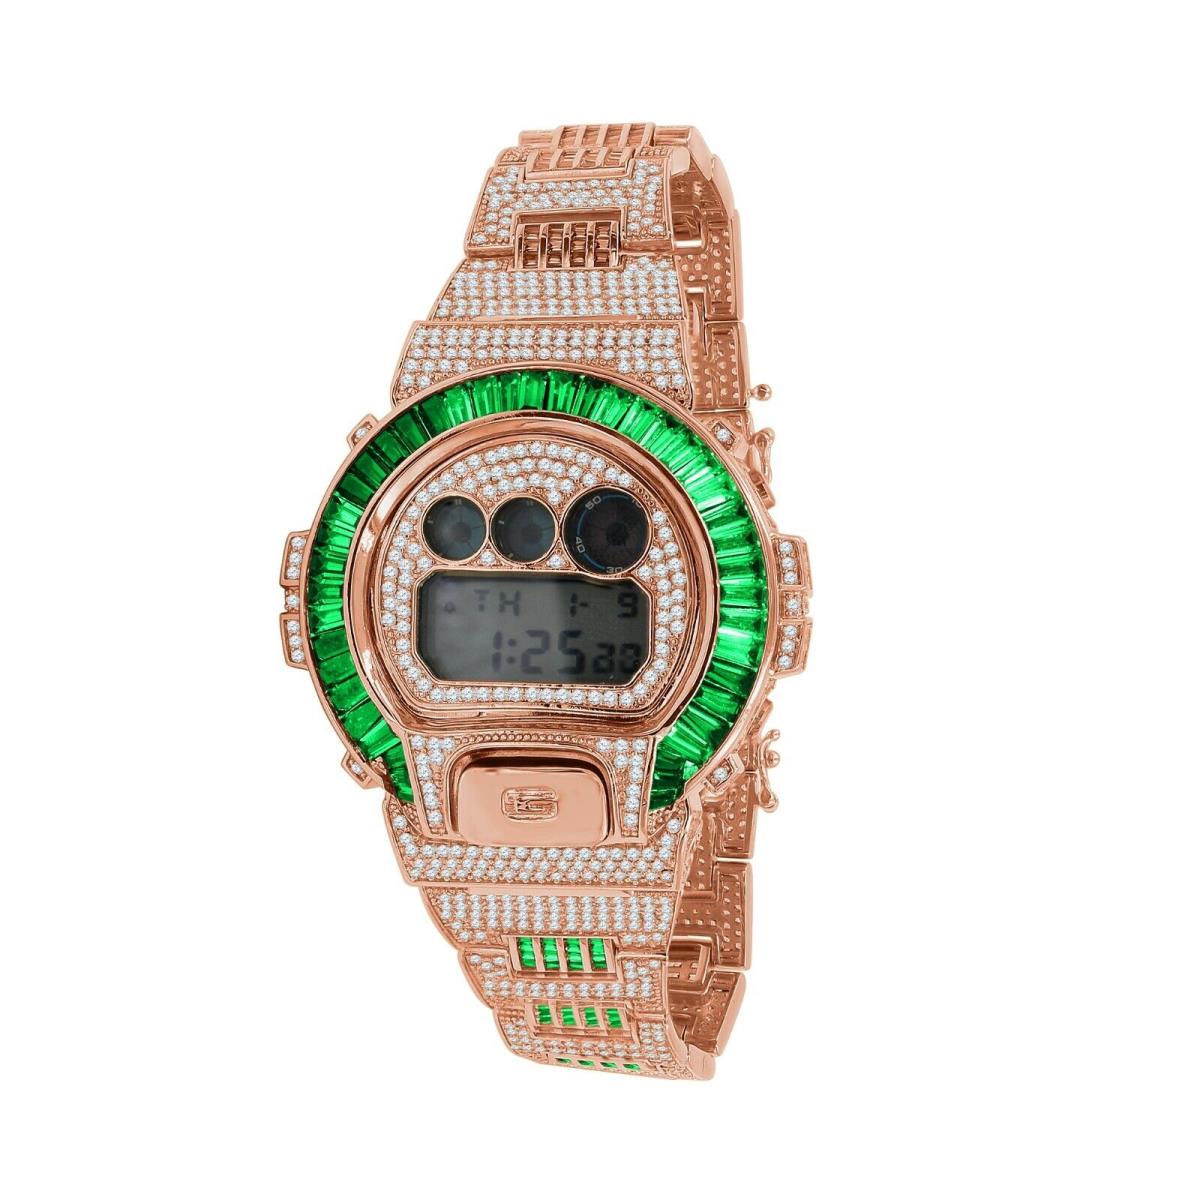 Icy Green Emerald Baguettes On Rose Gold Casio G-shock DW-6900 Watch